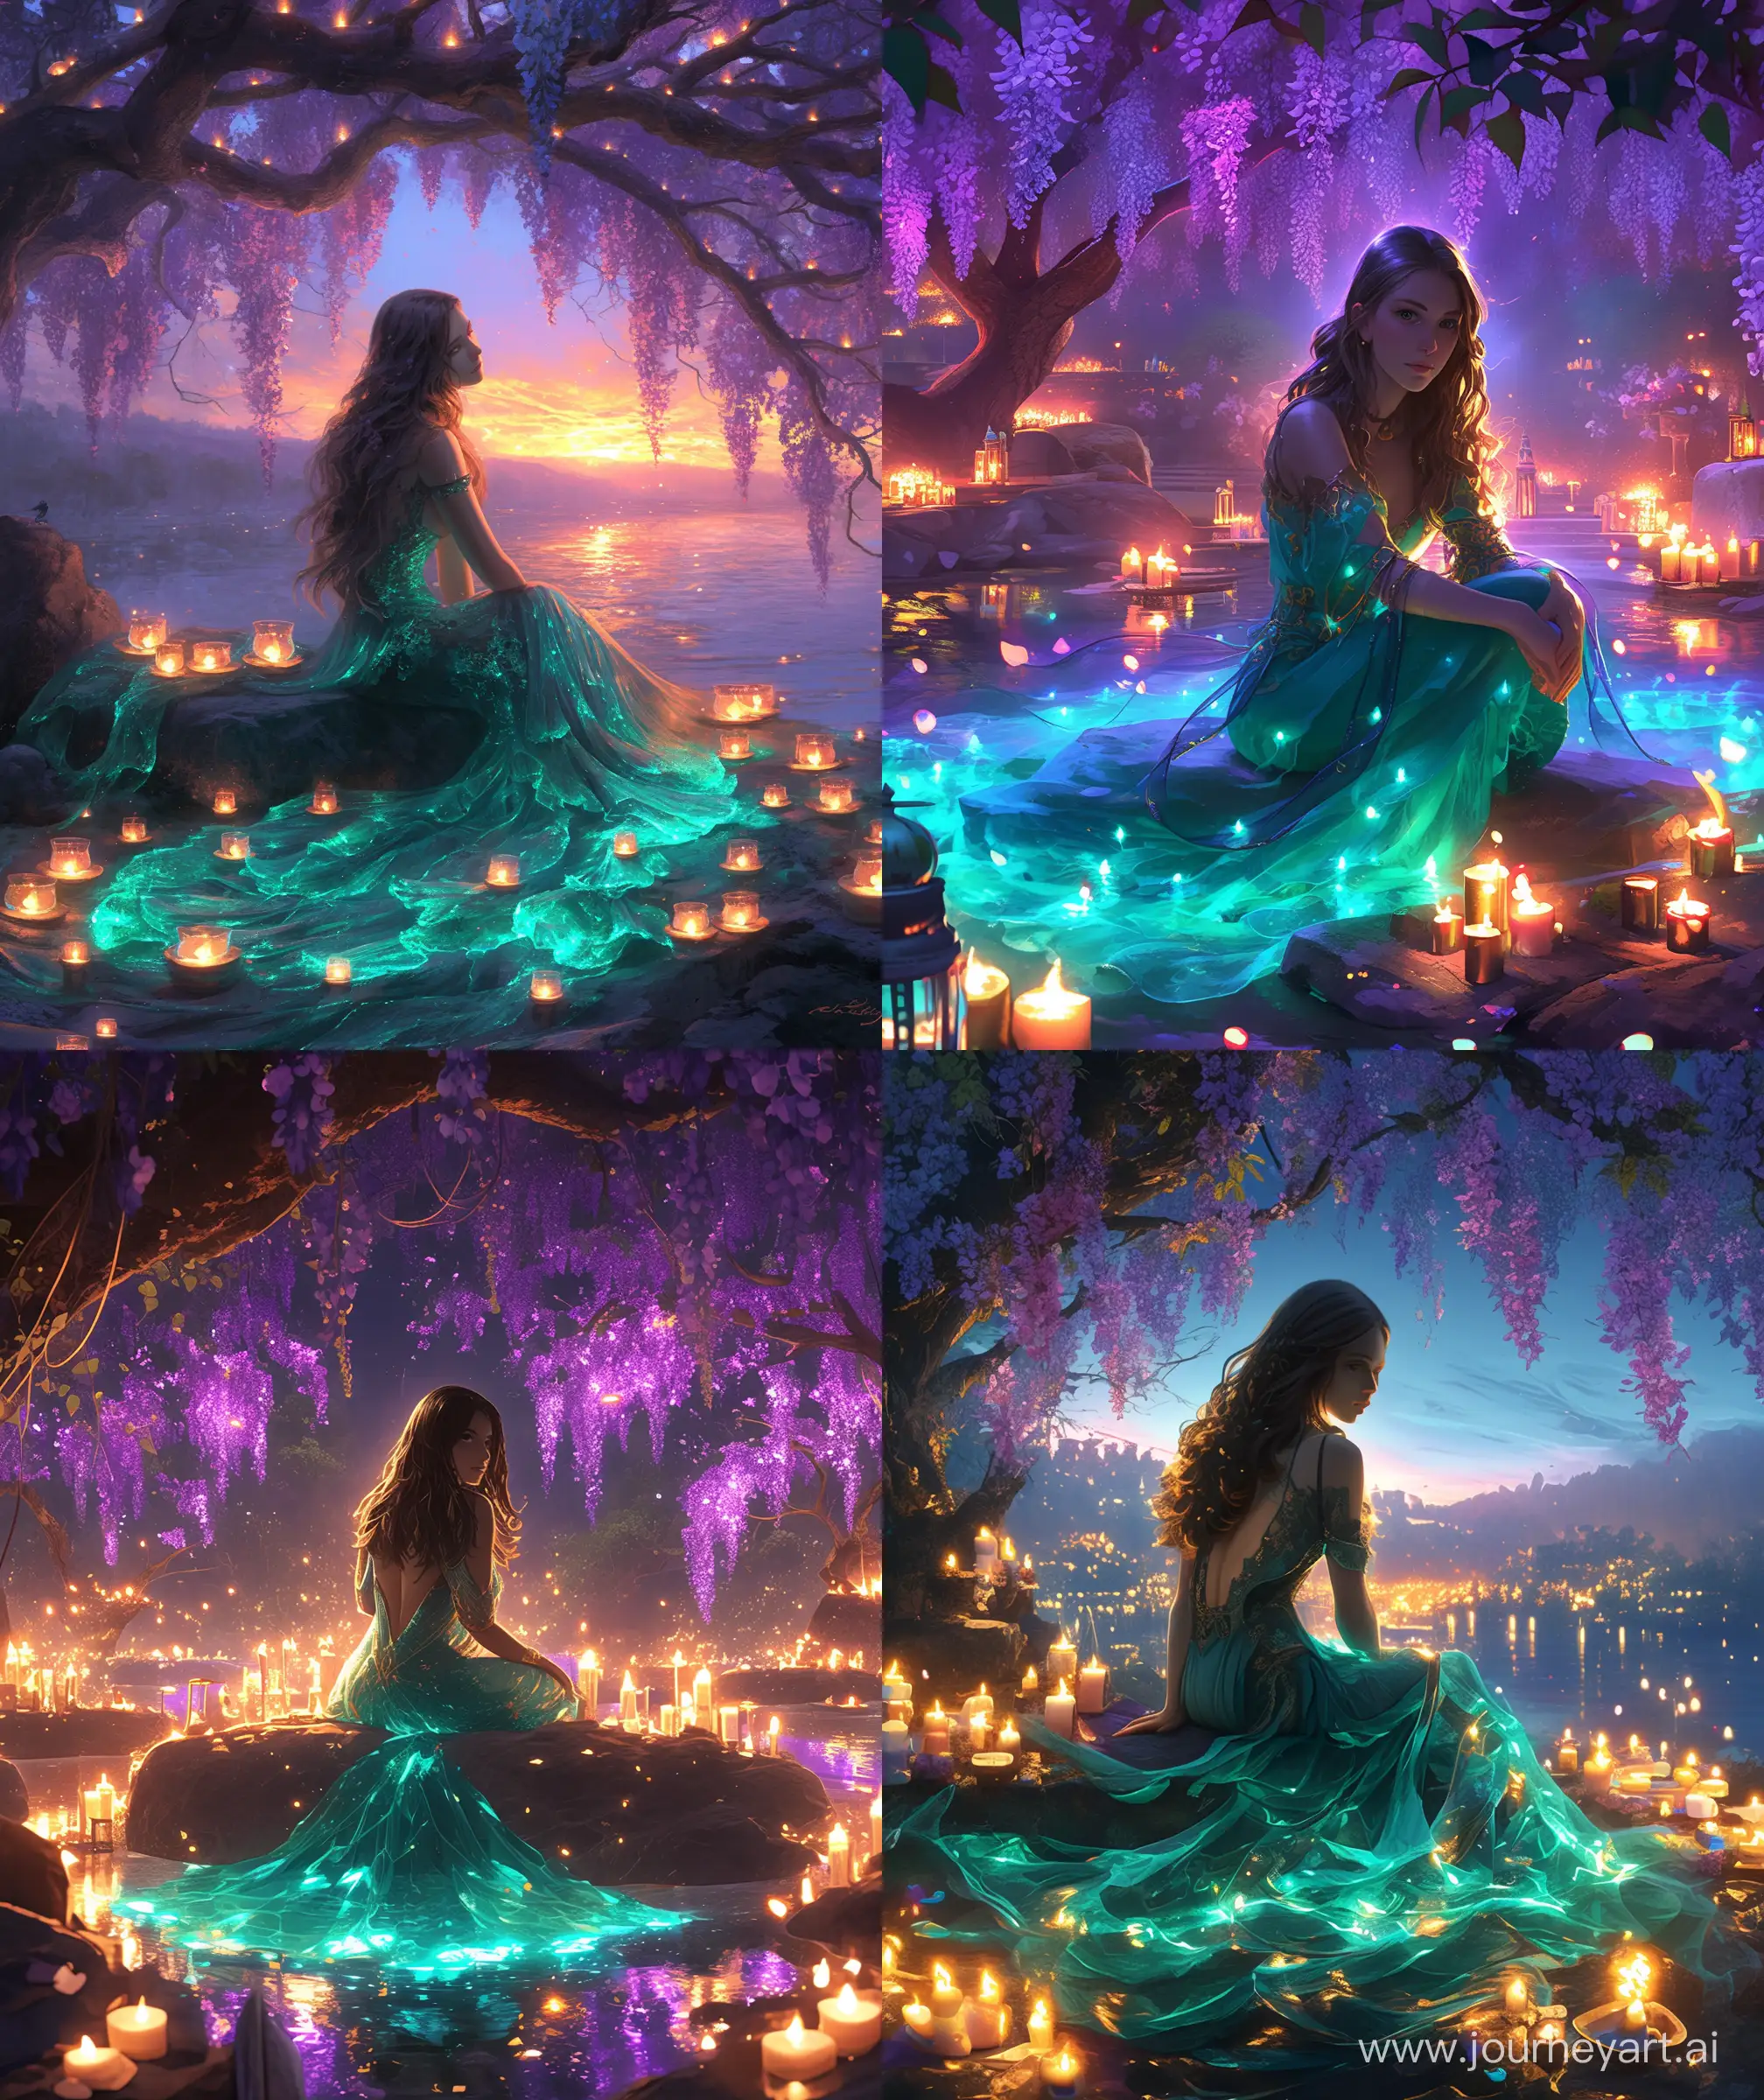 Beautiful woman , candle light, beautiful view, sitting on rock, many beautiful colourfull candle around , night, around purple wisteria tree, teal color glowing dress, upper body looking at viewer , ultra hd, High quality --ar 27:32 --niji 6